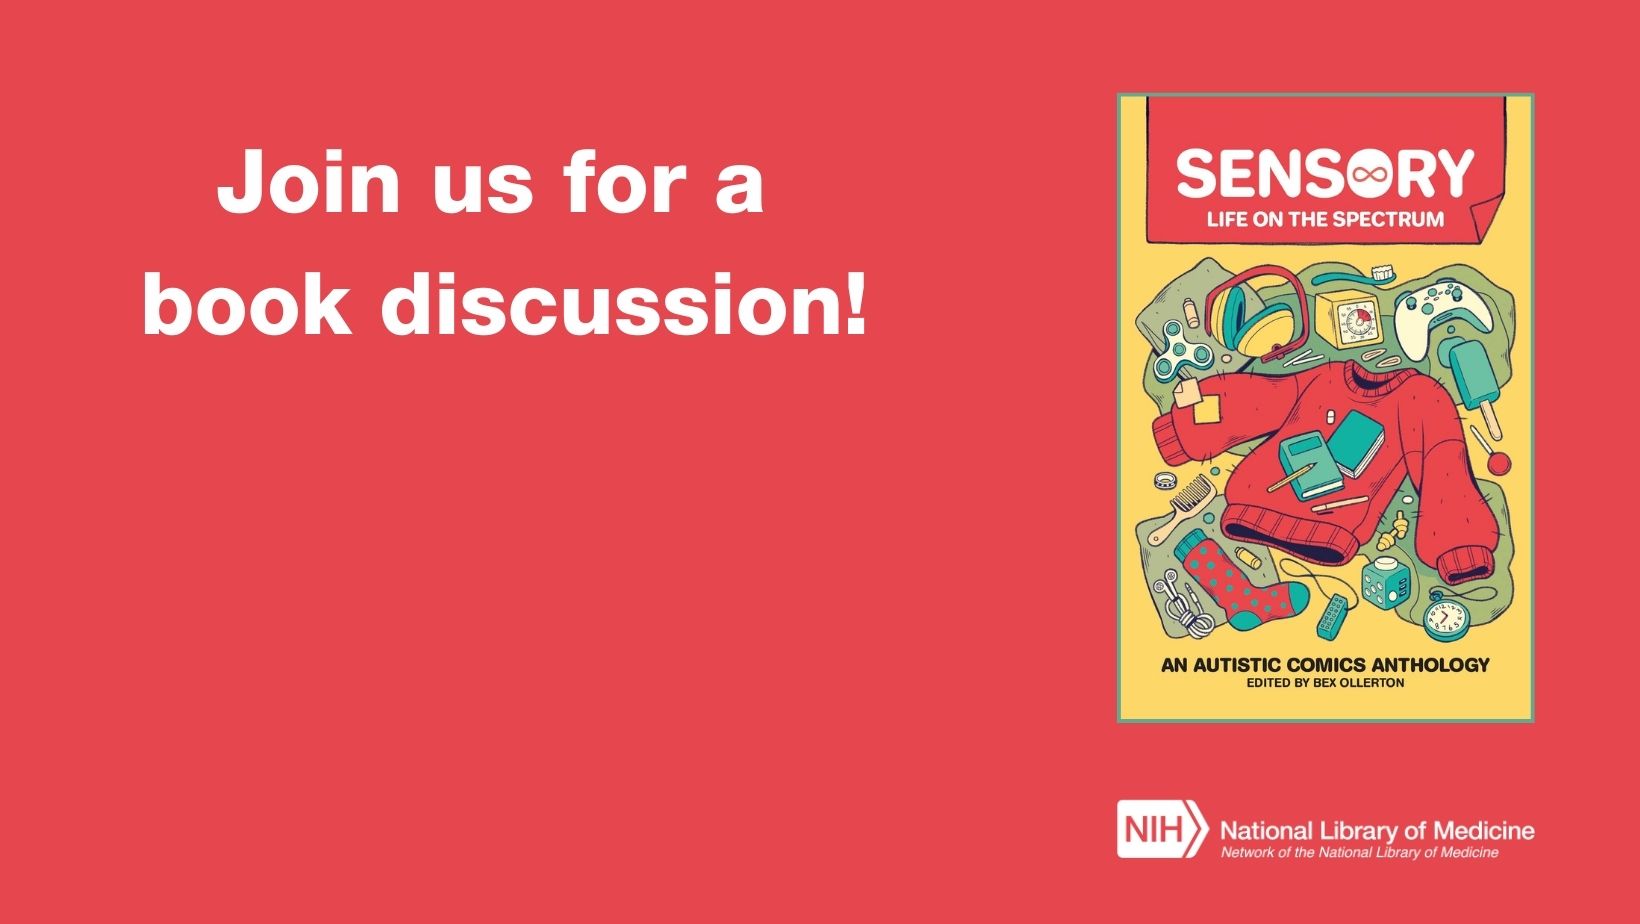 Join us for a book discussion of Sensory